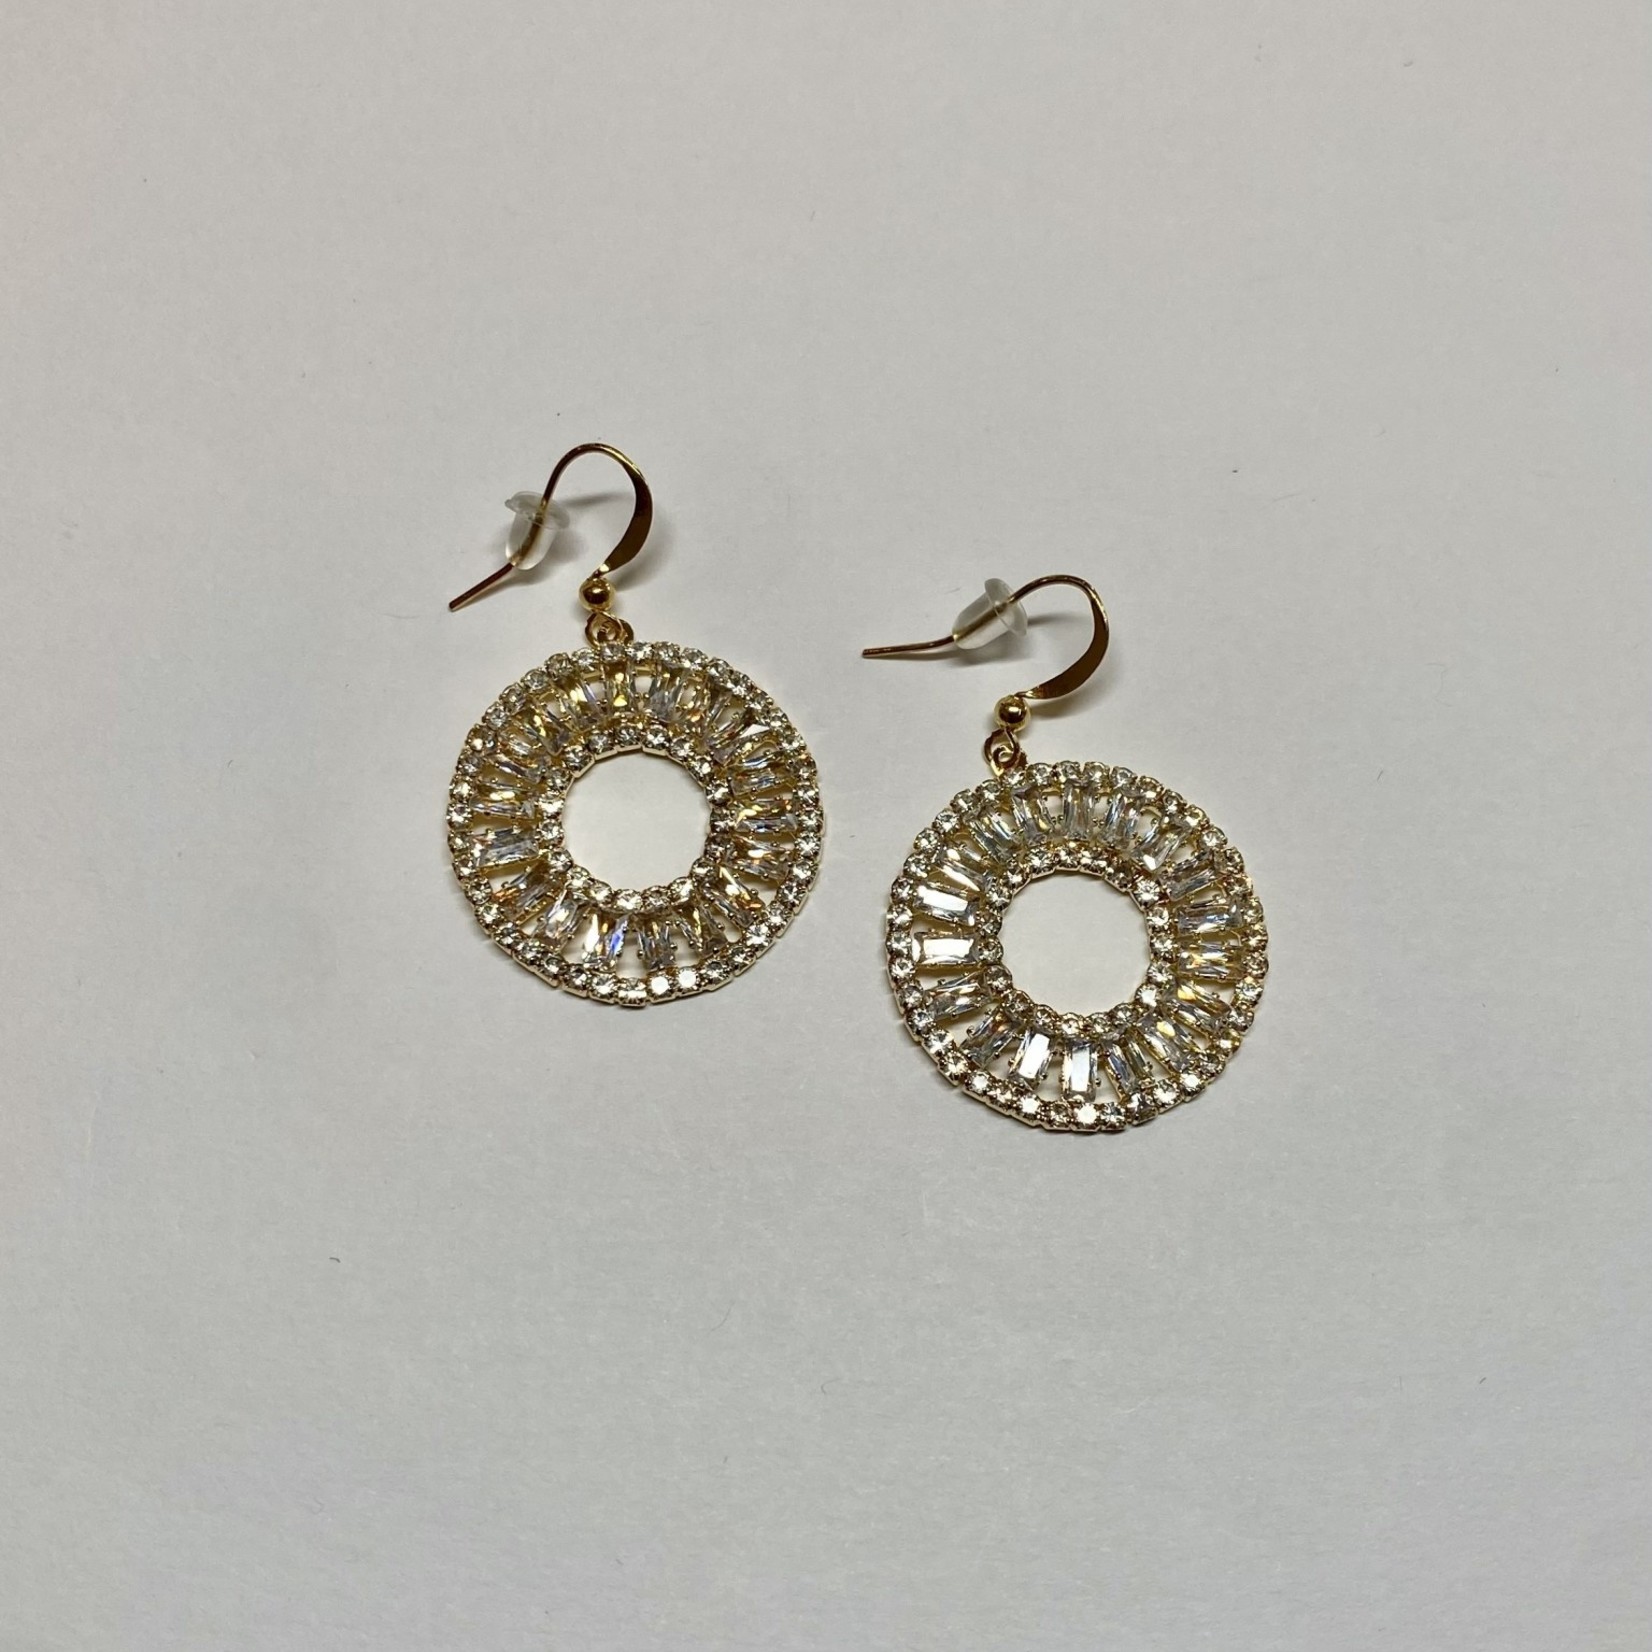 Small Open Circle Drop Earrings w/ CZ Pave